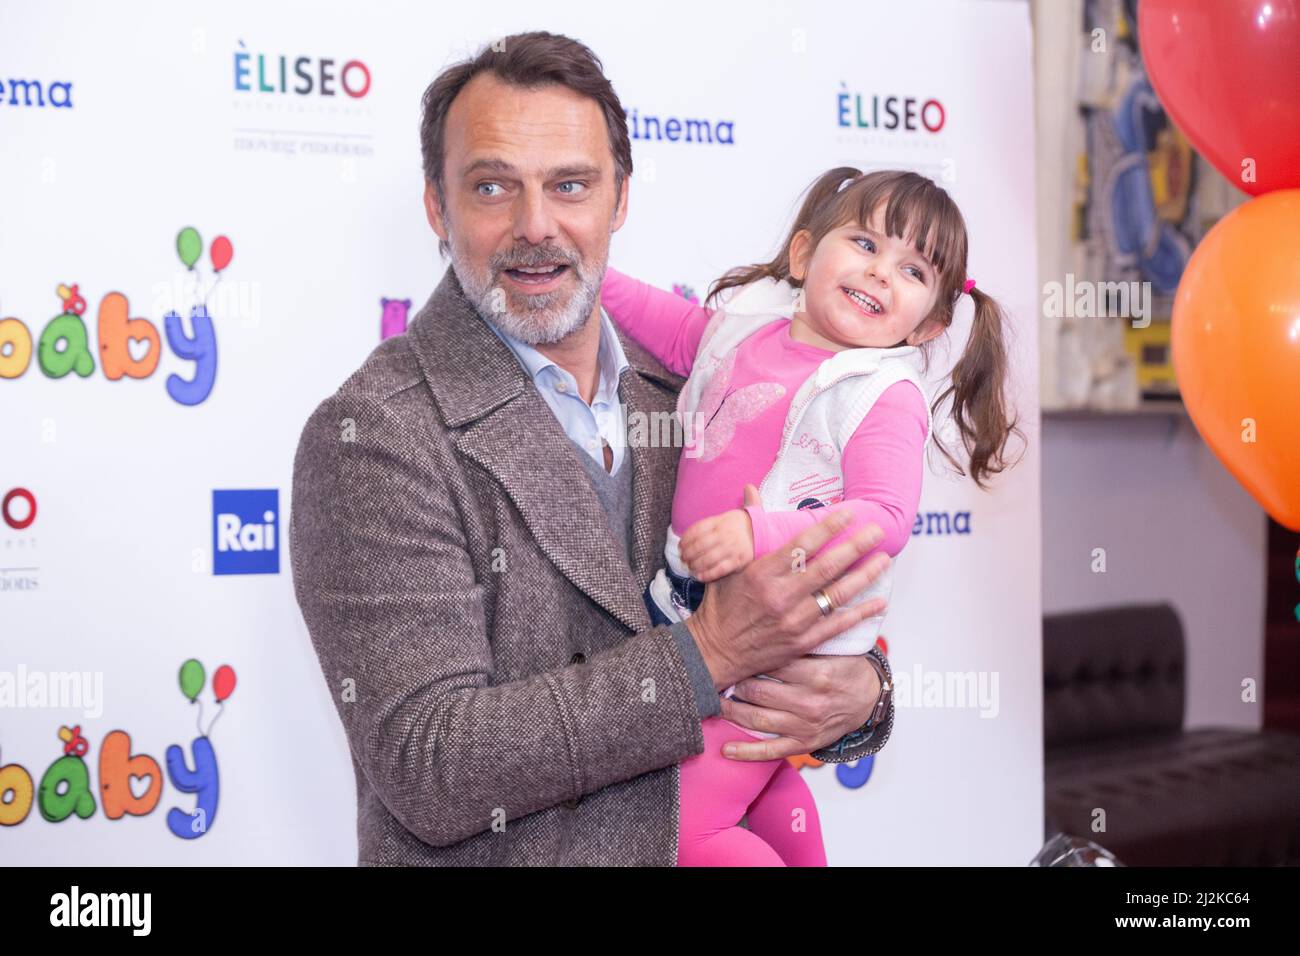 Rome, Italy. 02nd Apr, 2022. Alessandro Preziosi attends the photocall of  the film "Bla Bla Baby" at the Eliseo Theater in Rome (Photo by Matteo  Nardone/Pacific Press) Credit: Pacific Press Media Production